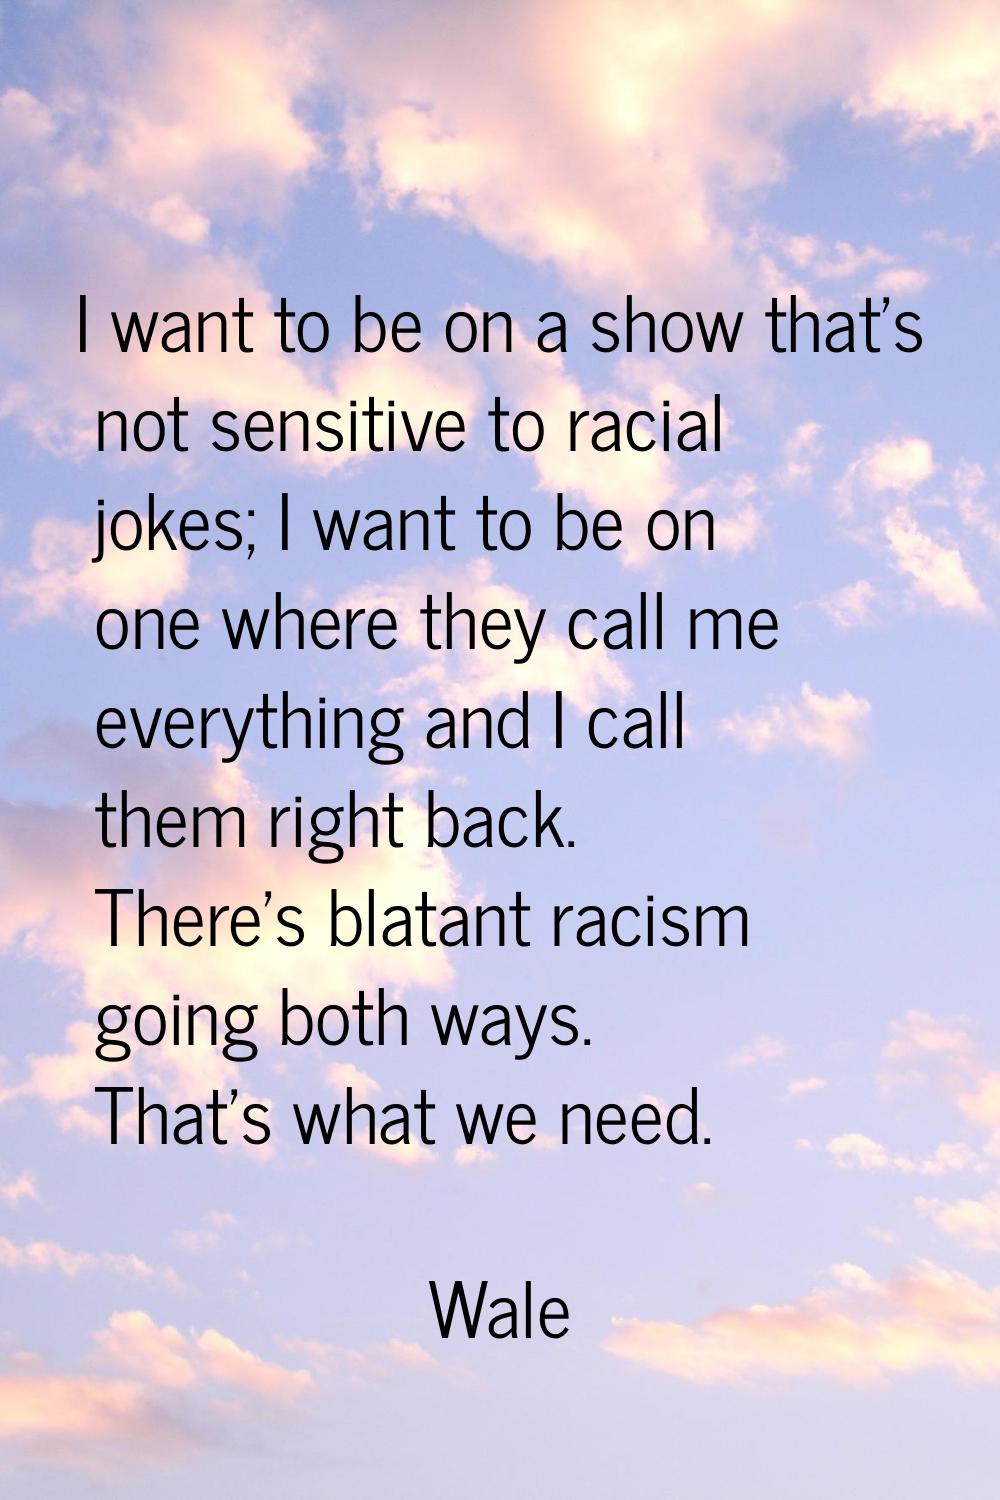 I want to be on a show that's not sensitive to racial jokes; I want to be on one where they call me